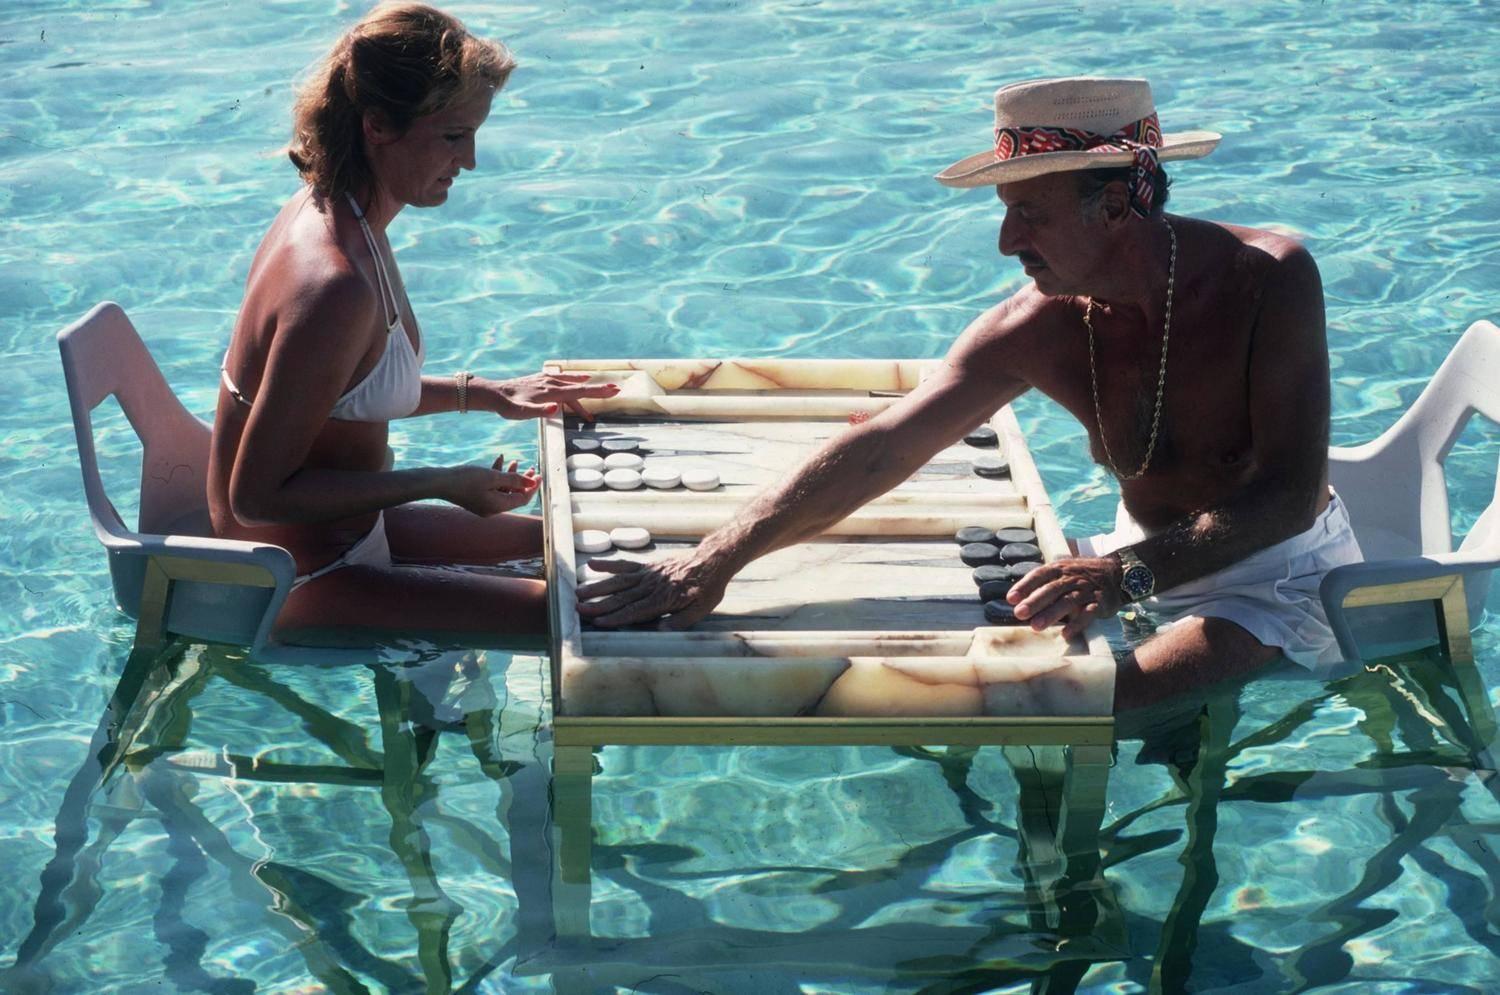 Carmen Alvarez enjoying a game of backgammon with Frank 'Brandy' Brandstetter in a swimming pool at Acapulco, 1978.

Slim Aarons
Keep Your Cool (Backgammon in Acapulco)
Chromogenic Lambda print
Printed Later
Slim Aarons Estate Edition
Complimentary